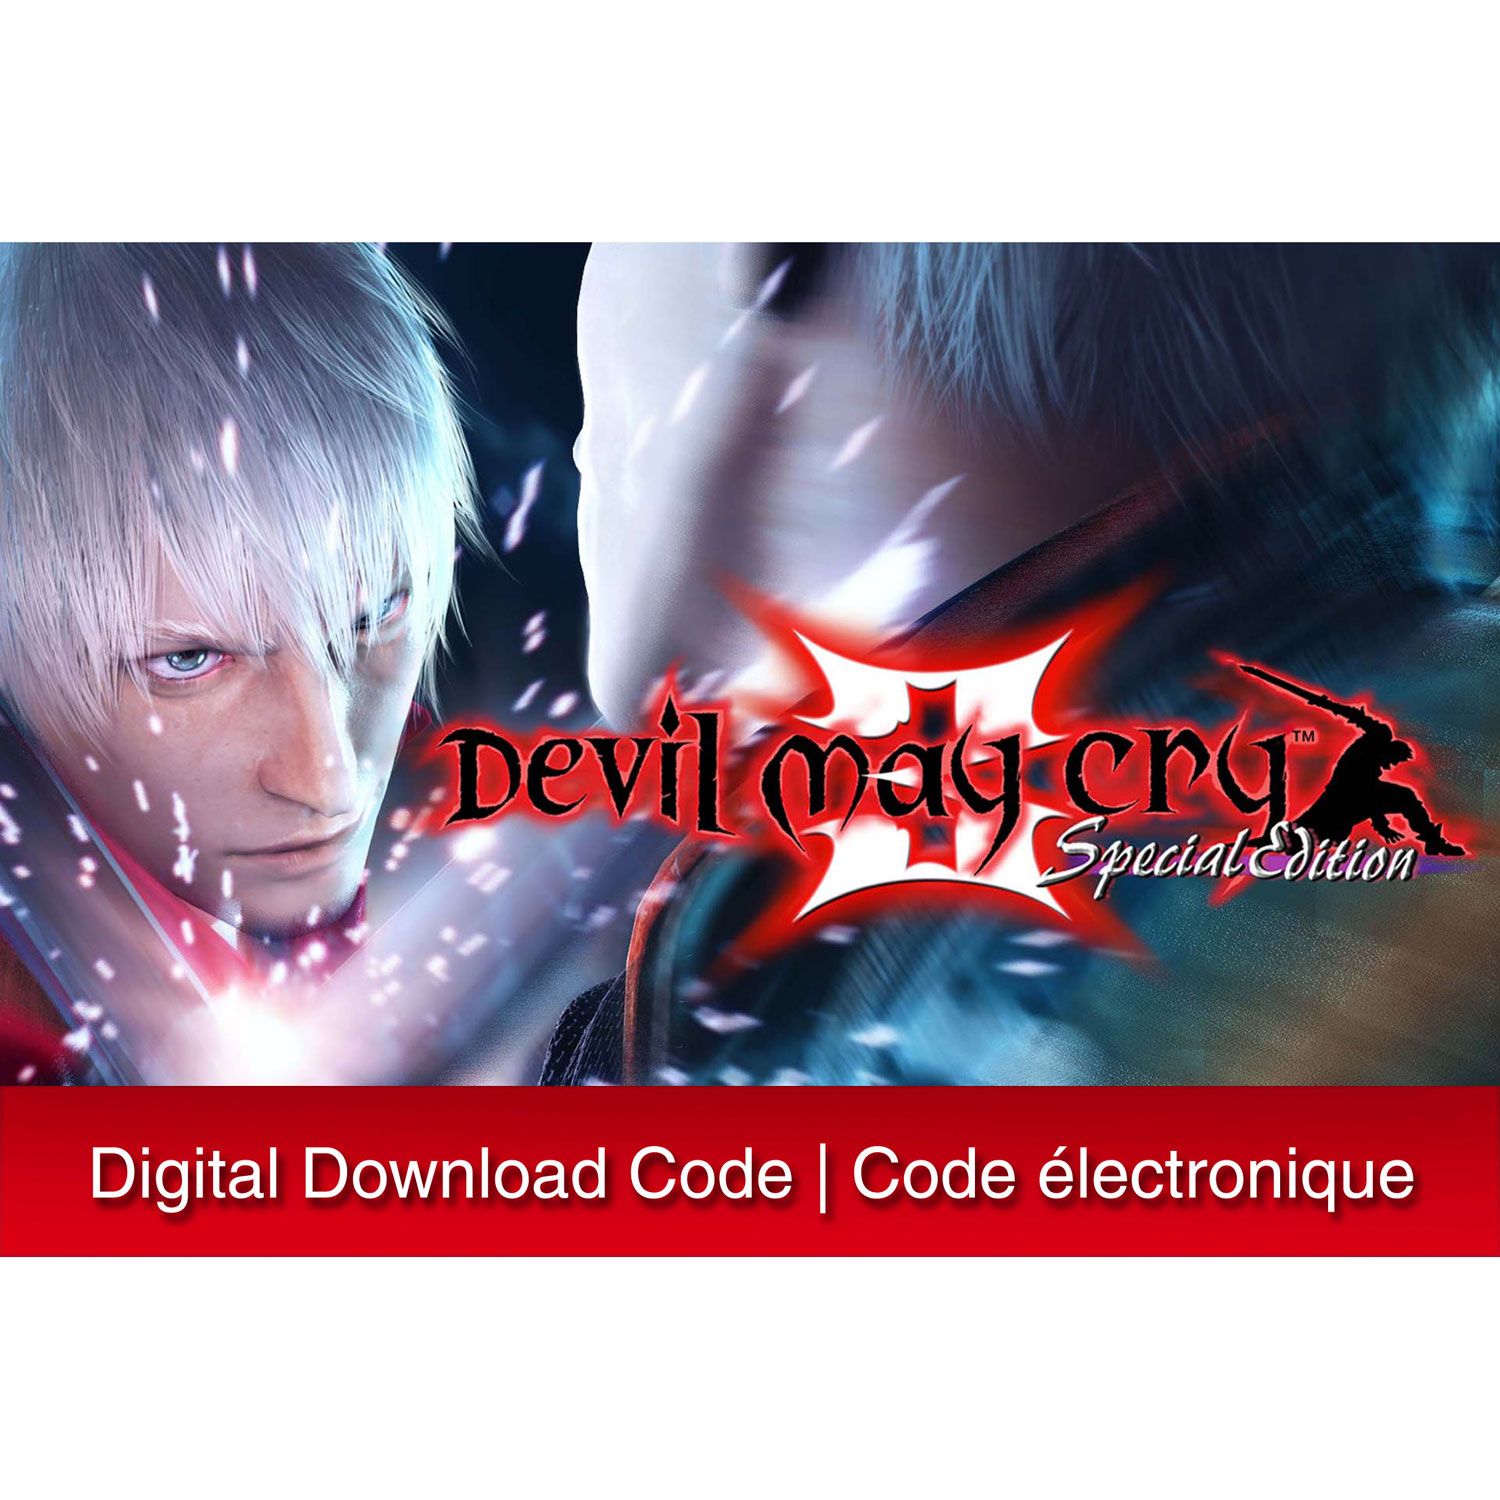 Devil May Cry 3 Special Edition (Switch) - Digital Download